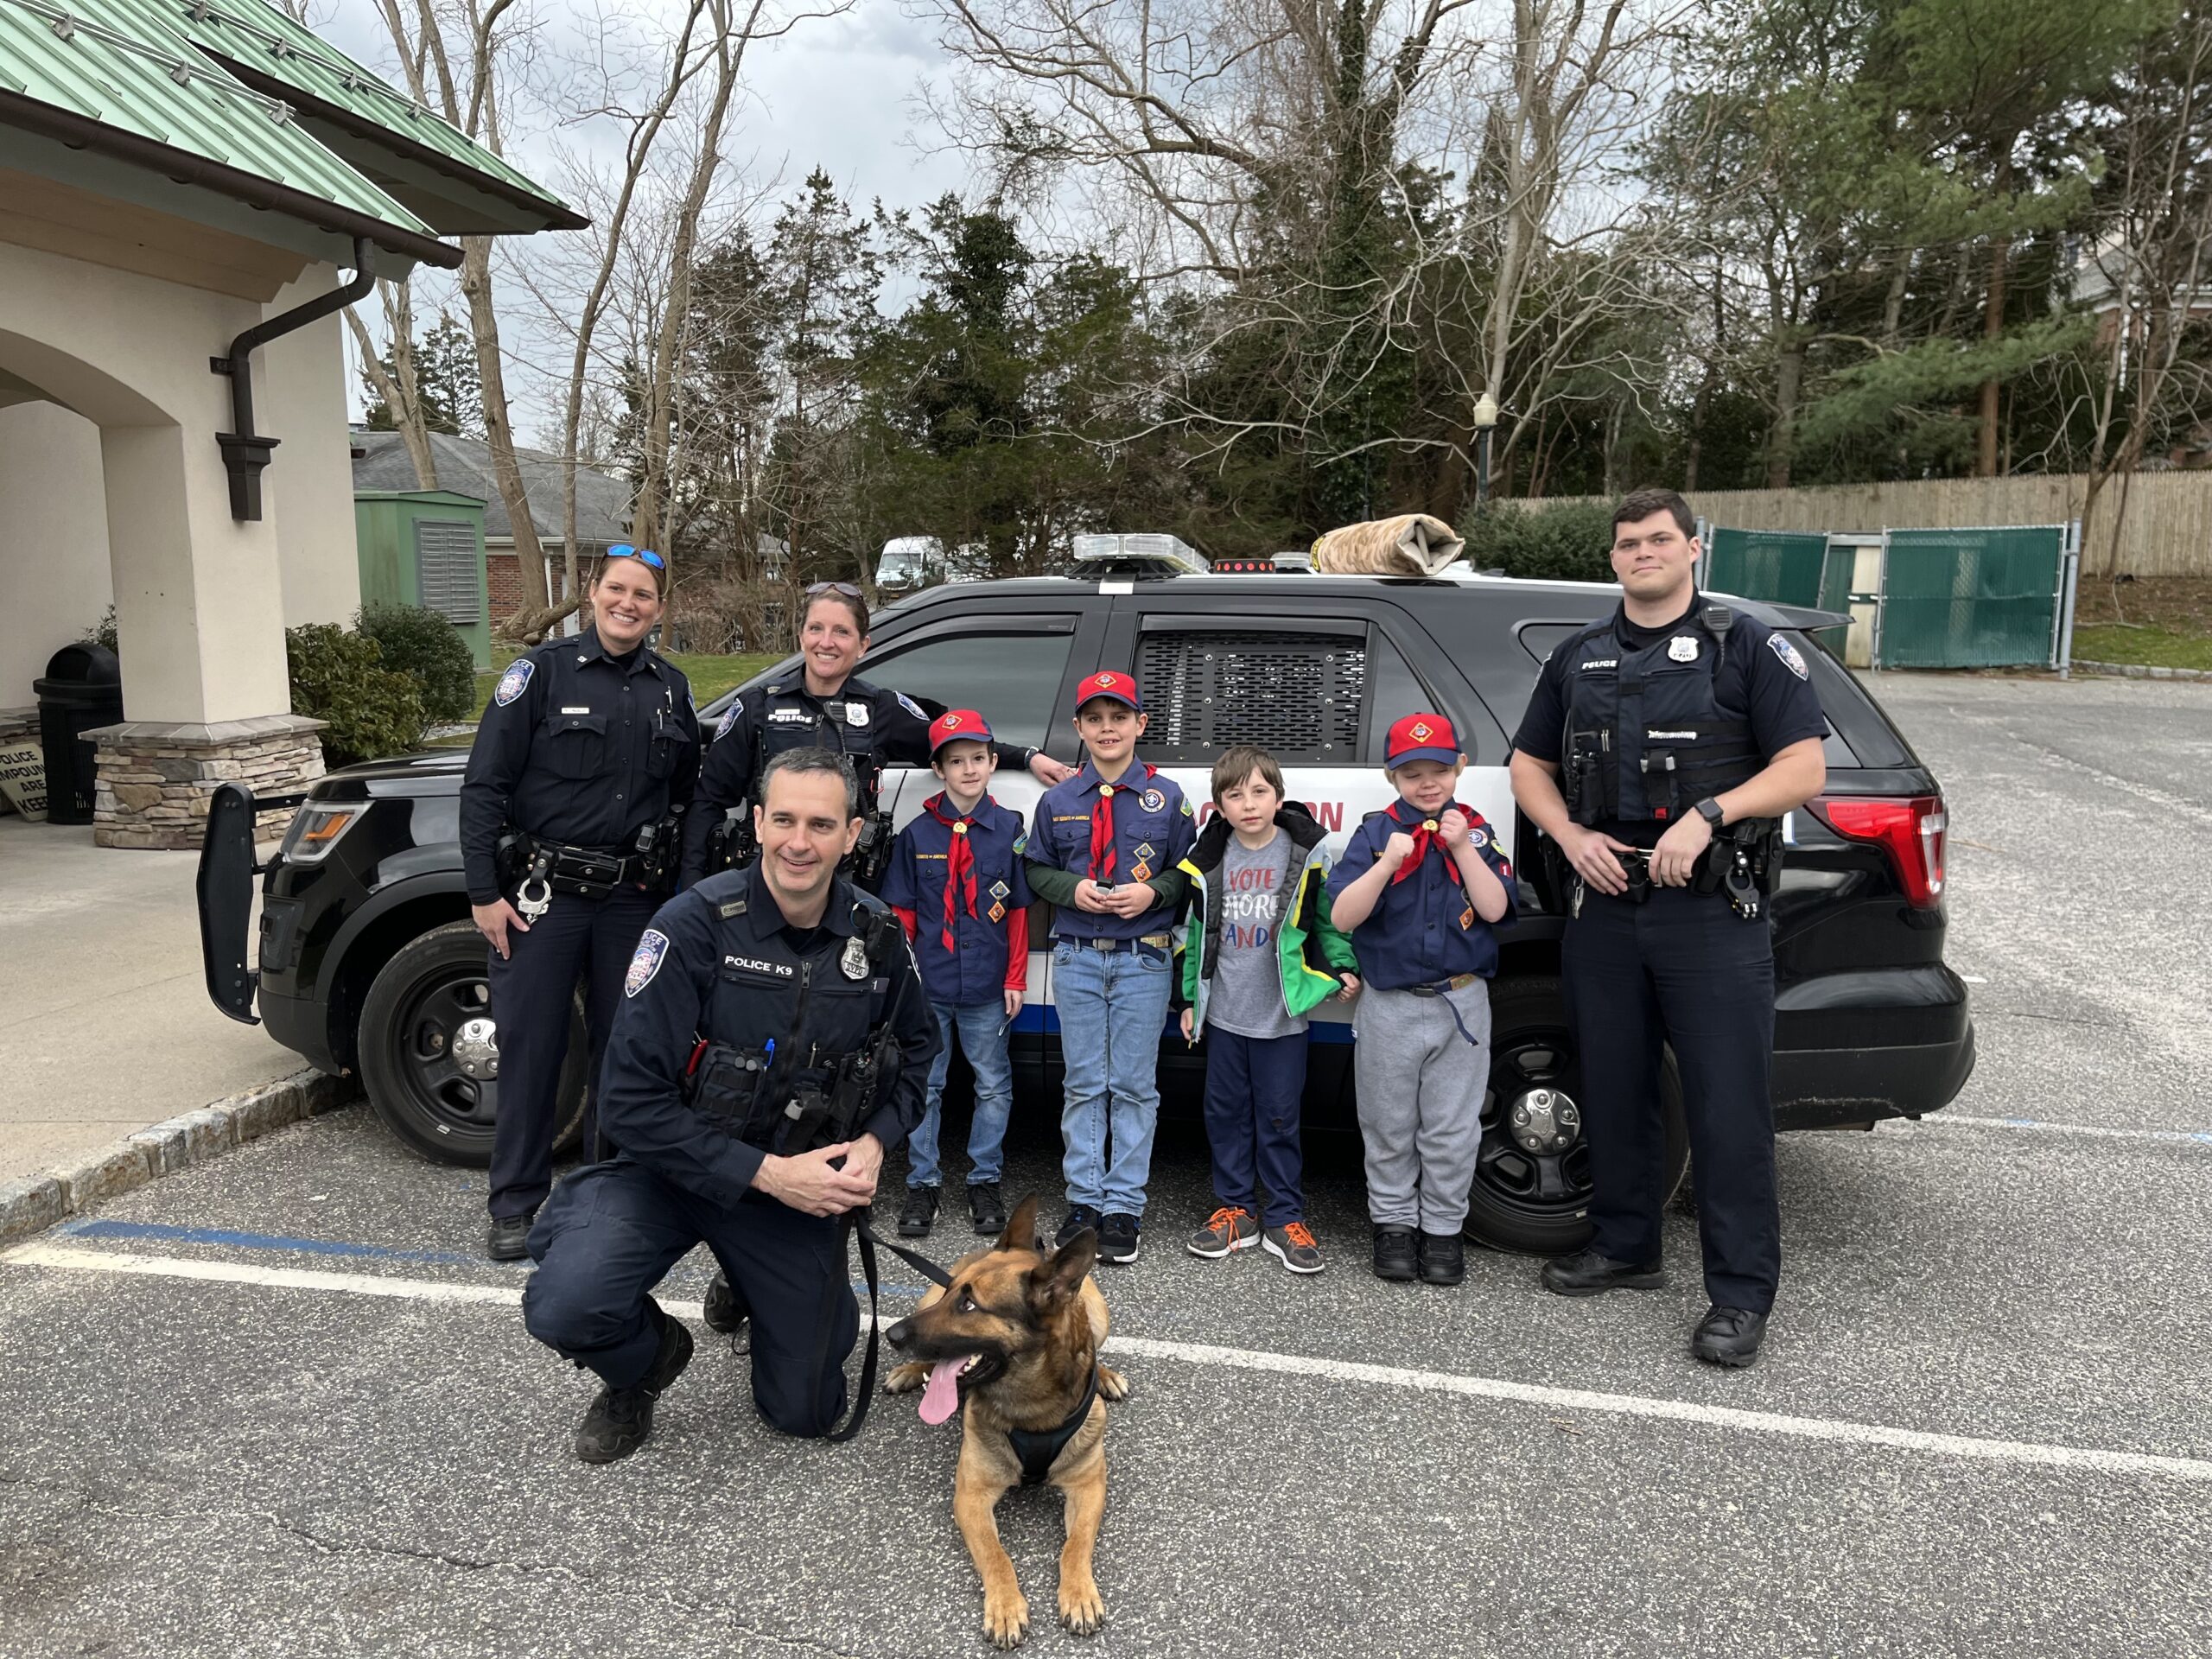 Members of Cub Scout Pack 14 Wolf Den visited Southampton Village Police headquarters on April 1 to work toward earning their “Council Fire” and “Hometown Heroes” achievements. Officers Lubold and McCulley gave the Scouts a tour, and Officers Moore and Cummings gave them a demonstrations with the help of K9 Officer Topper. COURTESY CHRIS CAPALBO